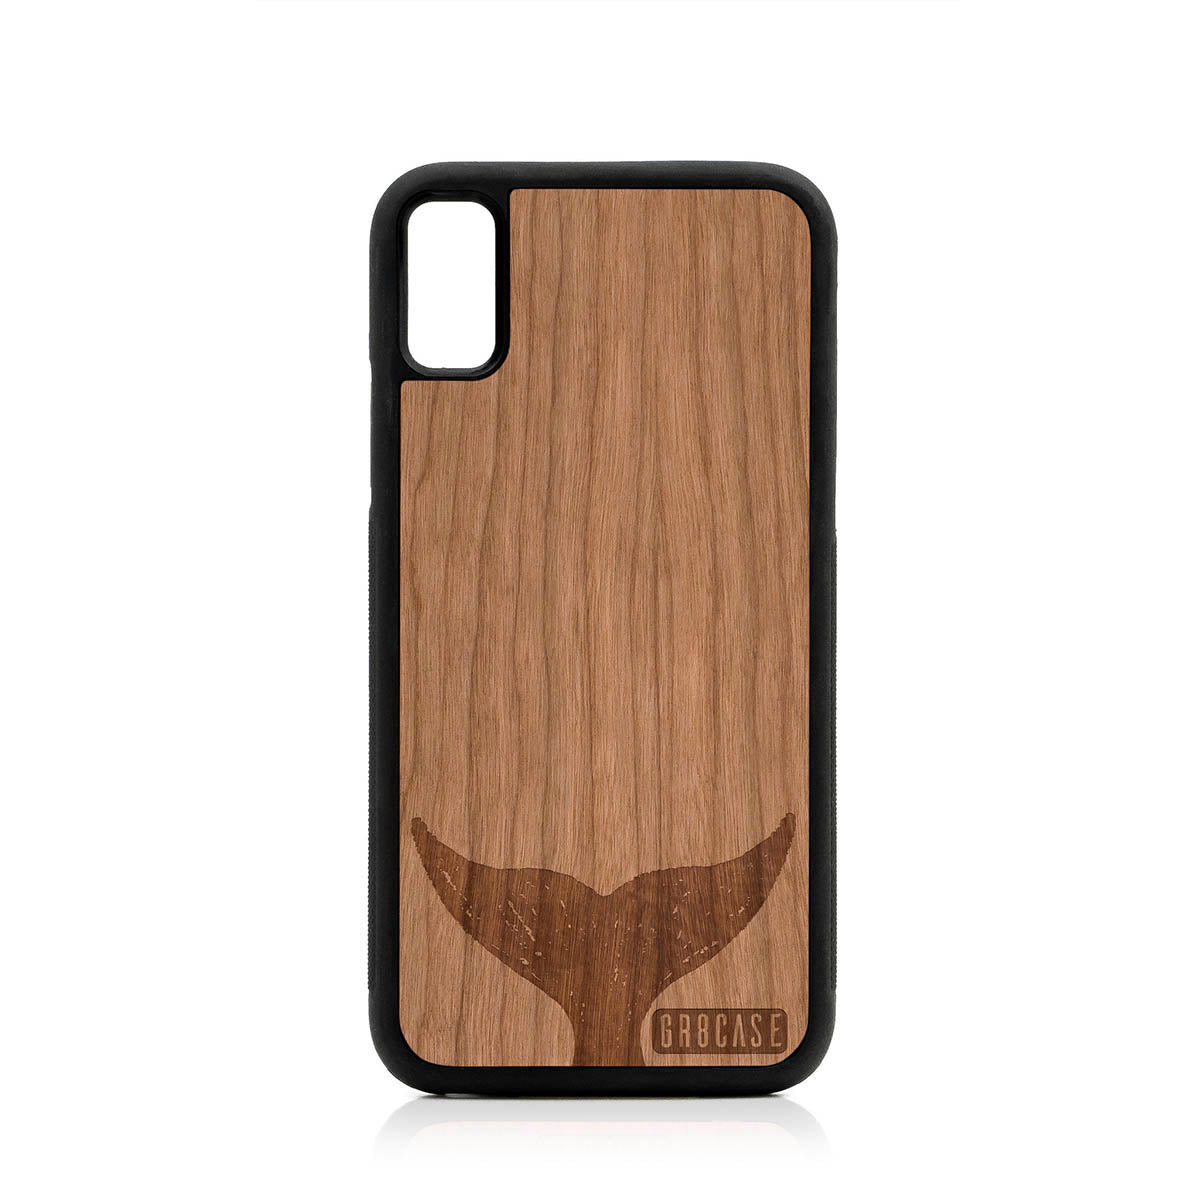 Whale Tail Design Wood Case For iPhone XS Max